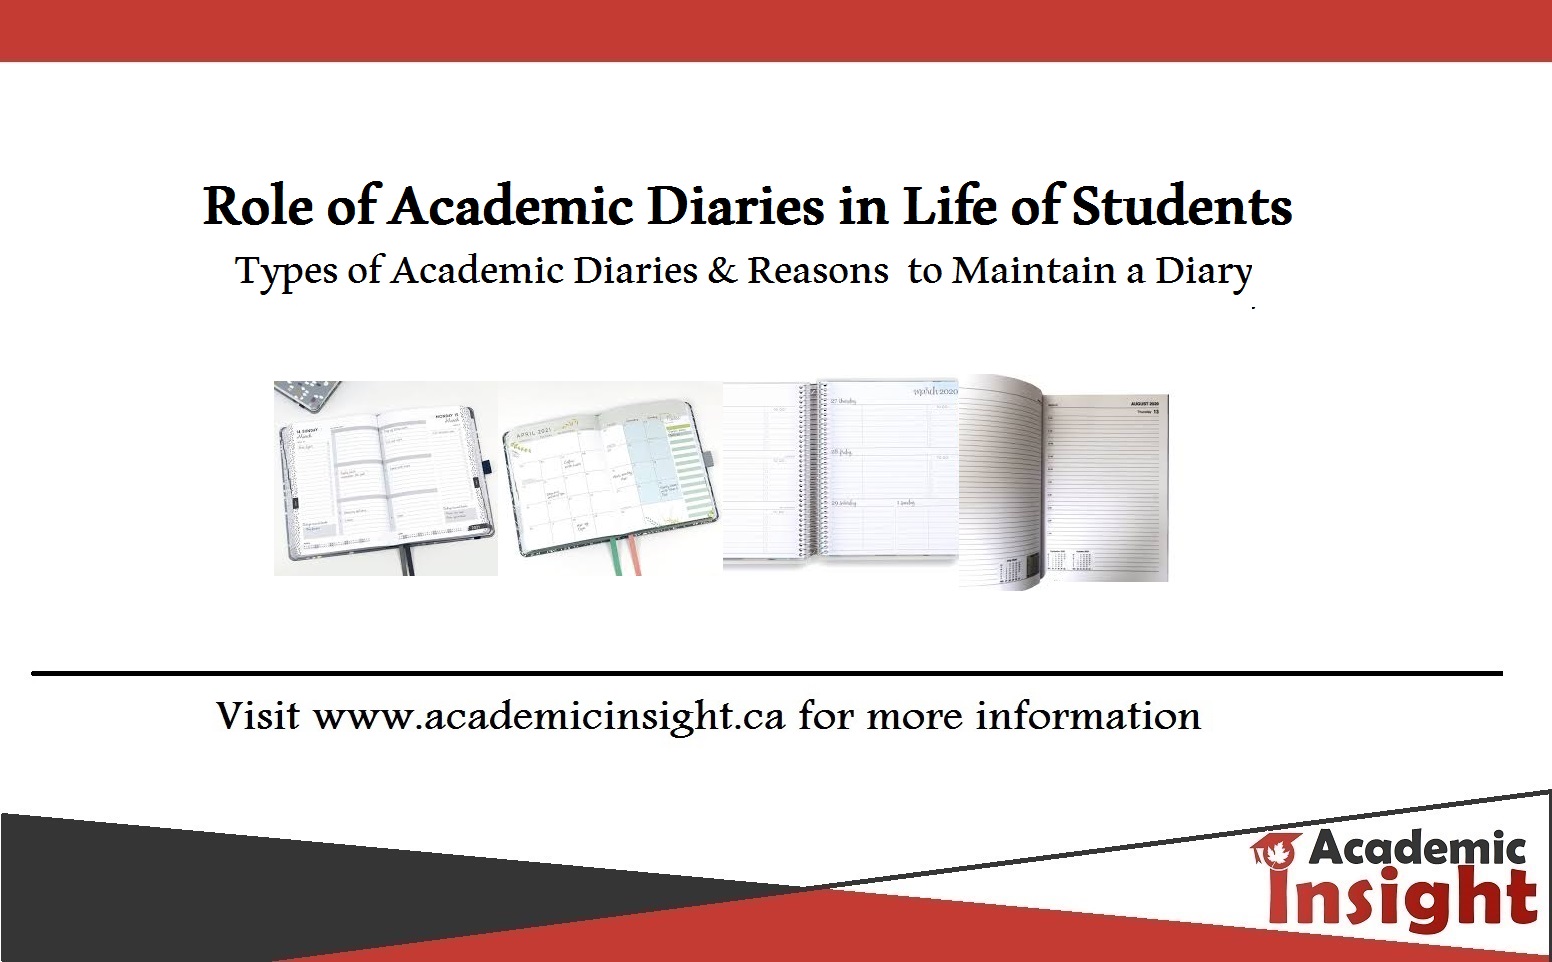 Role of Academic Diaries in the Life of Students